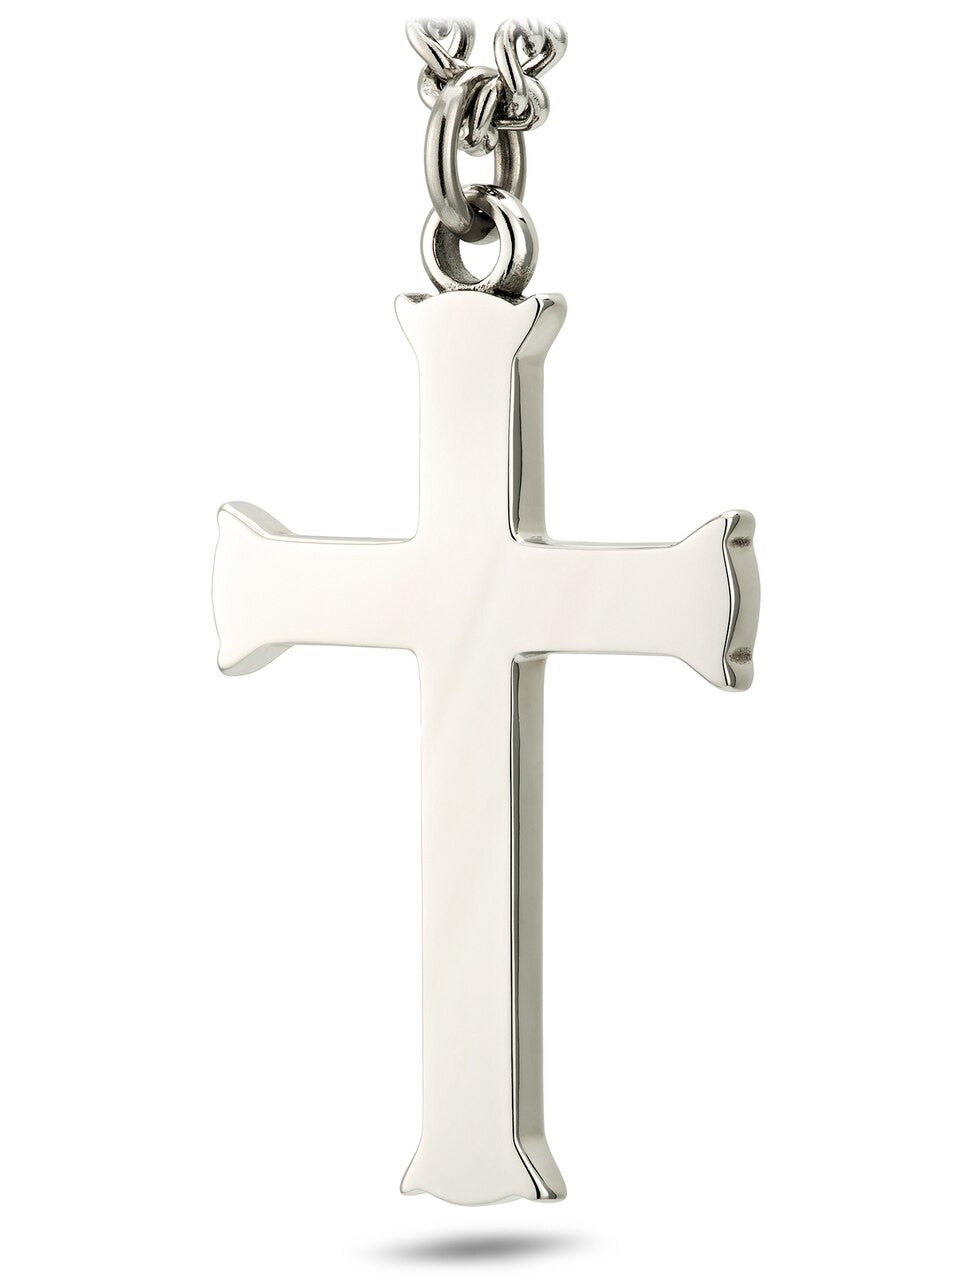 Shields of Strength Men's Stainless Steel Flare Cross Necklace - The Tool Store